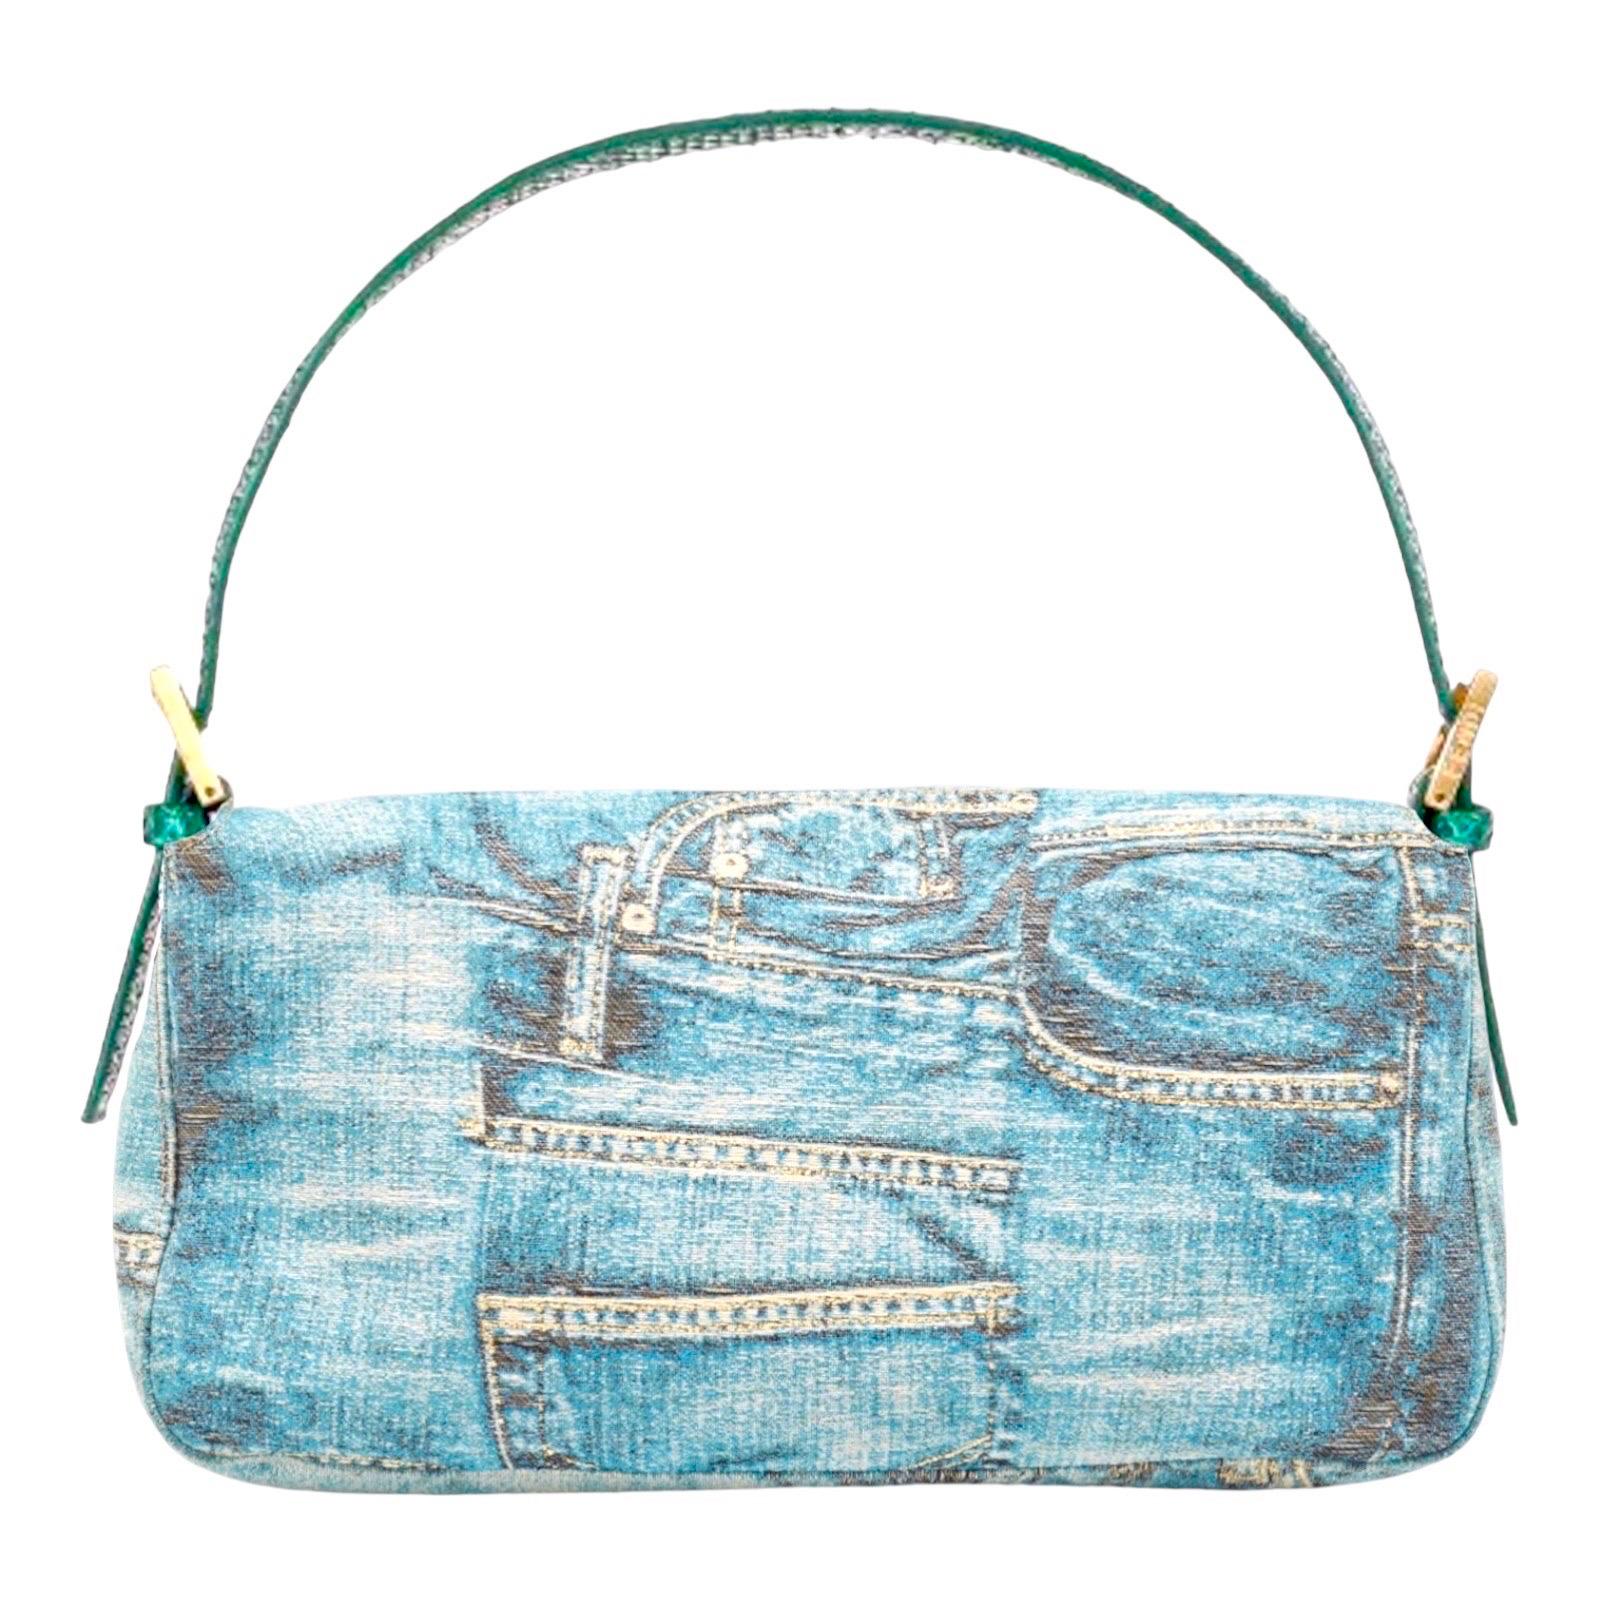 Rare find! FENDI Baguette vintage shoulder bag in jeans print with a twist - in shiny lurex and luxurious exotic leathers trimming.
This bag was featured in the Baguettemania exhibition celebrating 15 years Baguette at Colette Paris and is